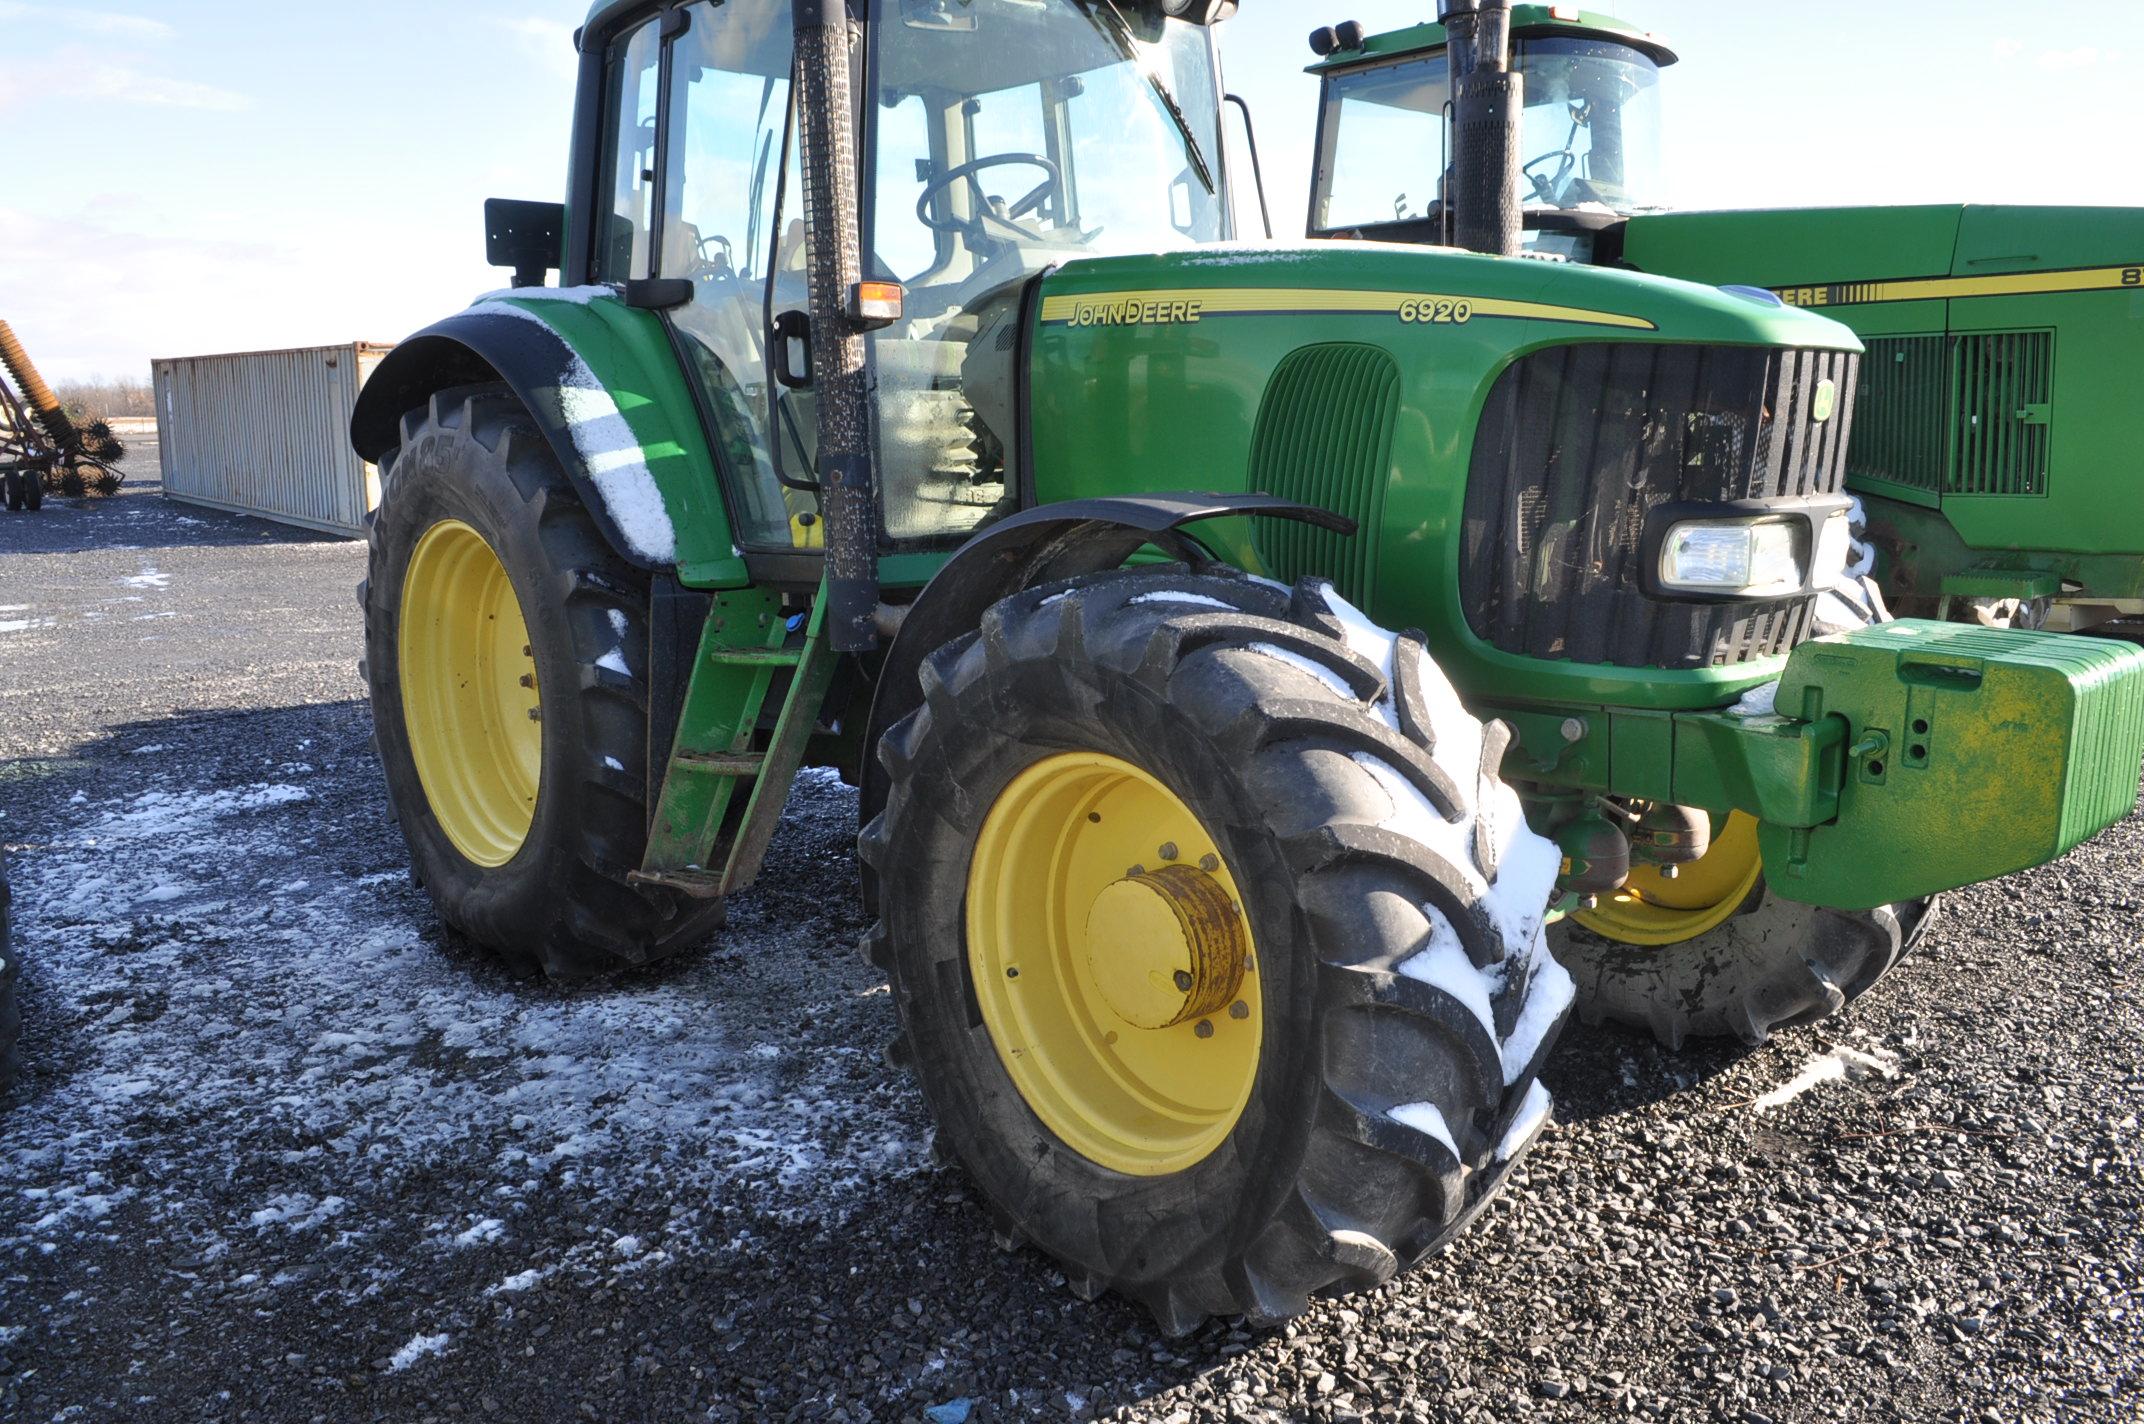 JD 6920 w/ 12,333hrs, 20spd trans w/ high road gear, LHReverser, 4wd, 540/1000 pto, 4 remotes, 12 fr